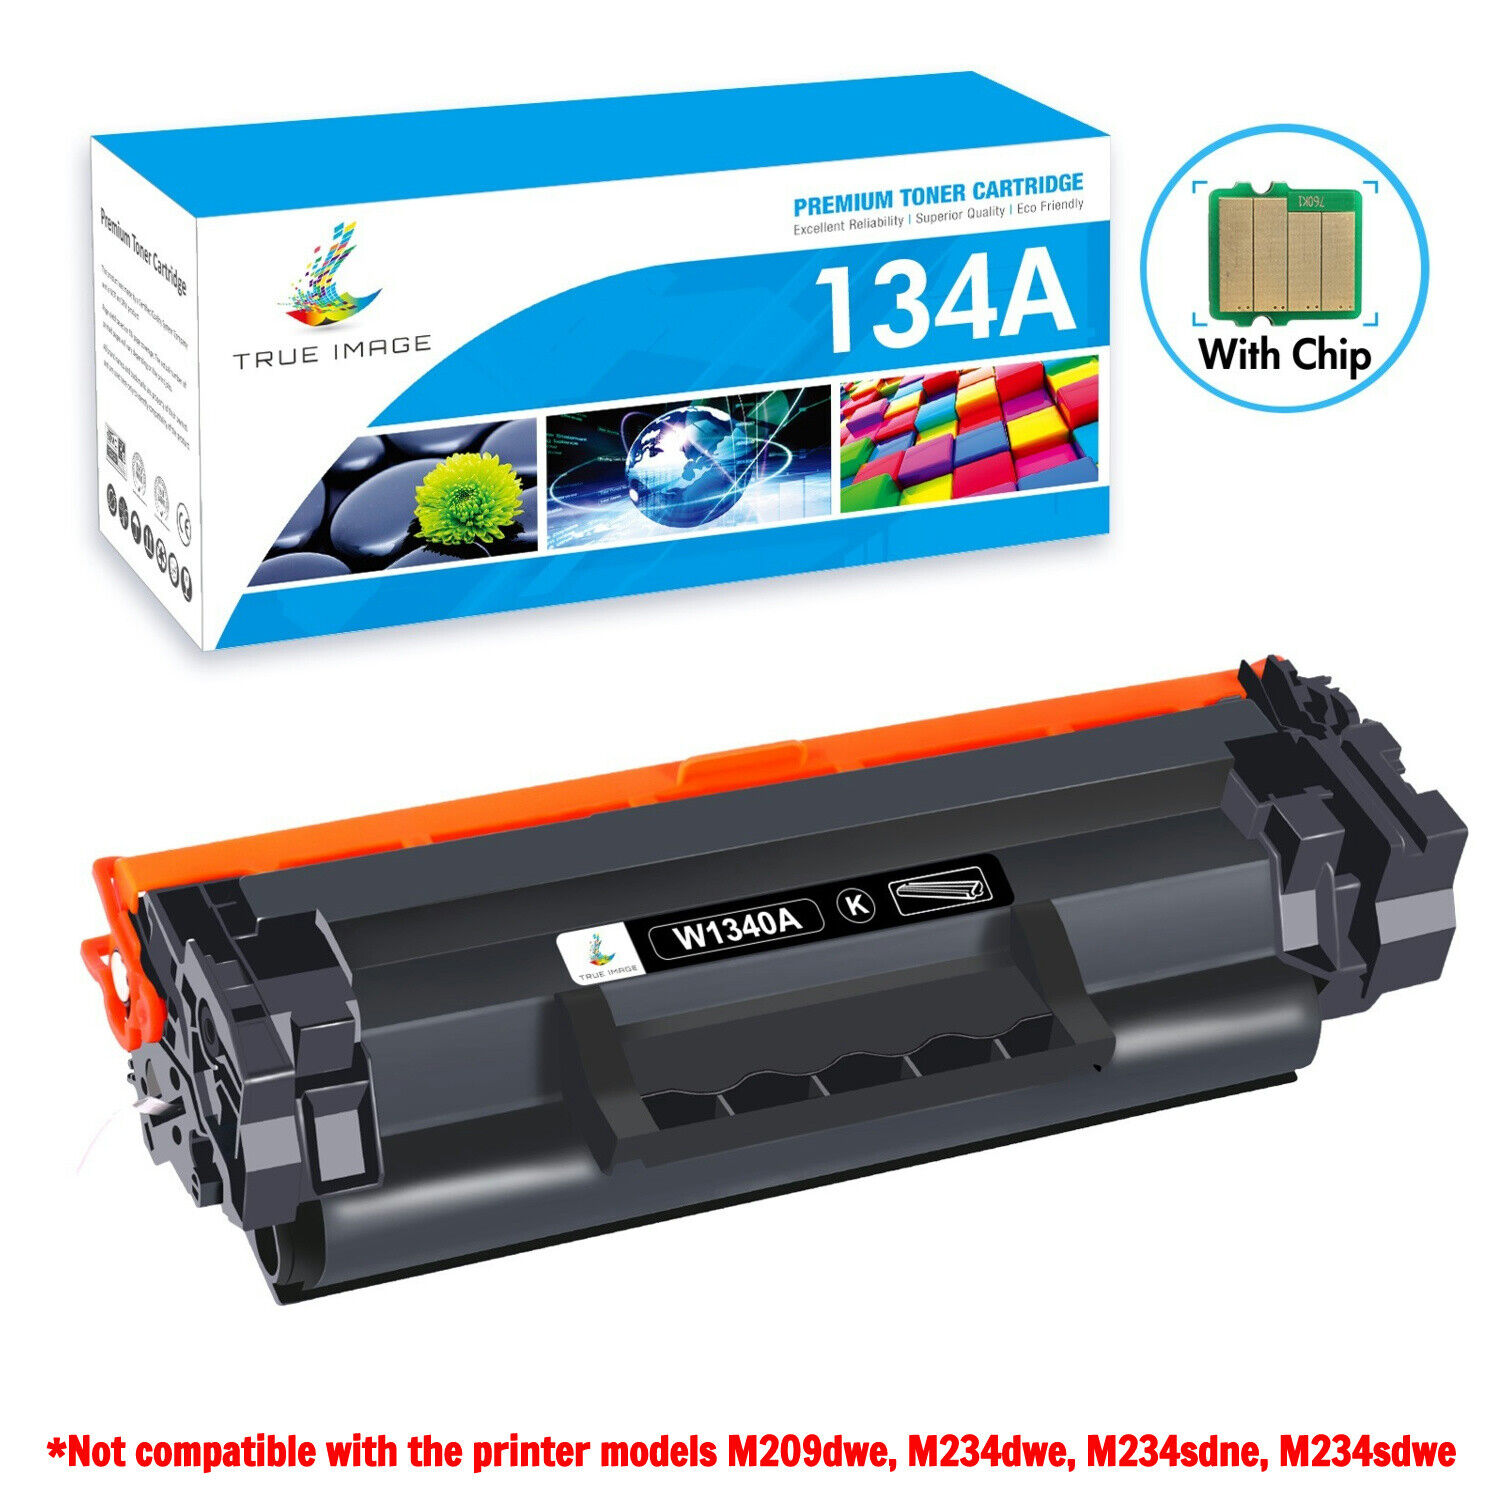 1PK W1340A 134A Toner Cartridge for HP LaserJet M209dw MFP M234sdw [With Chip]